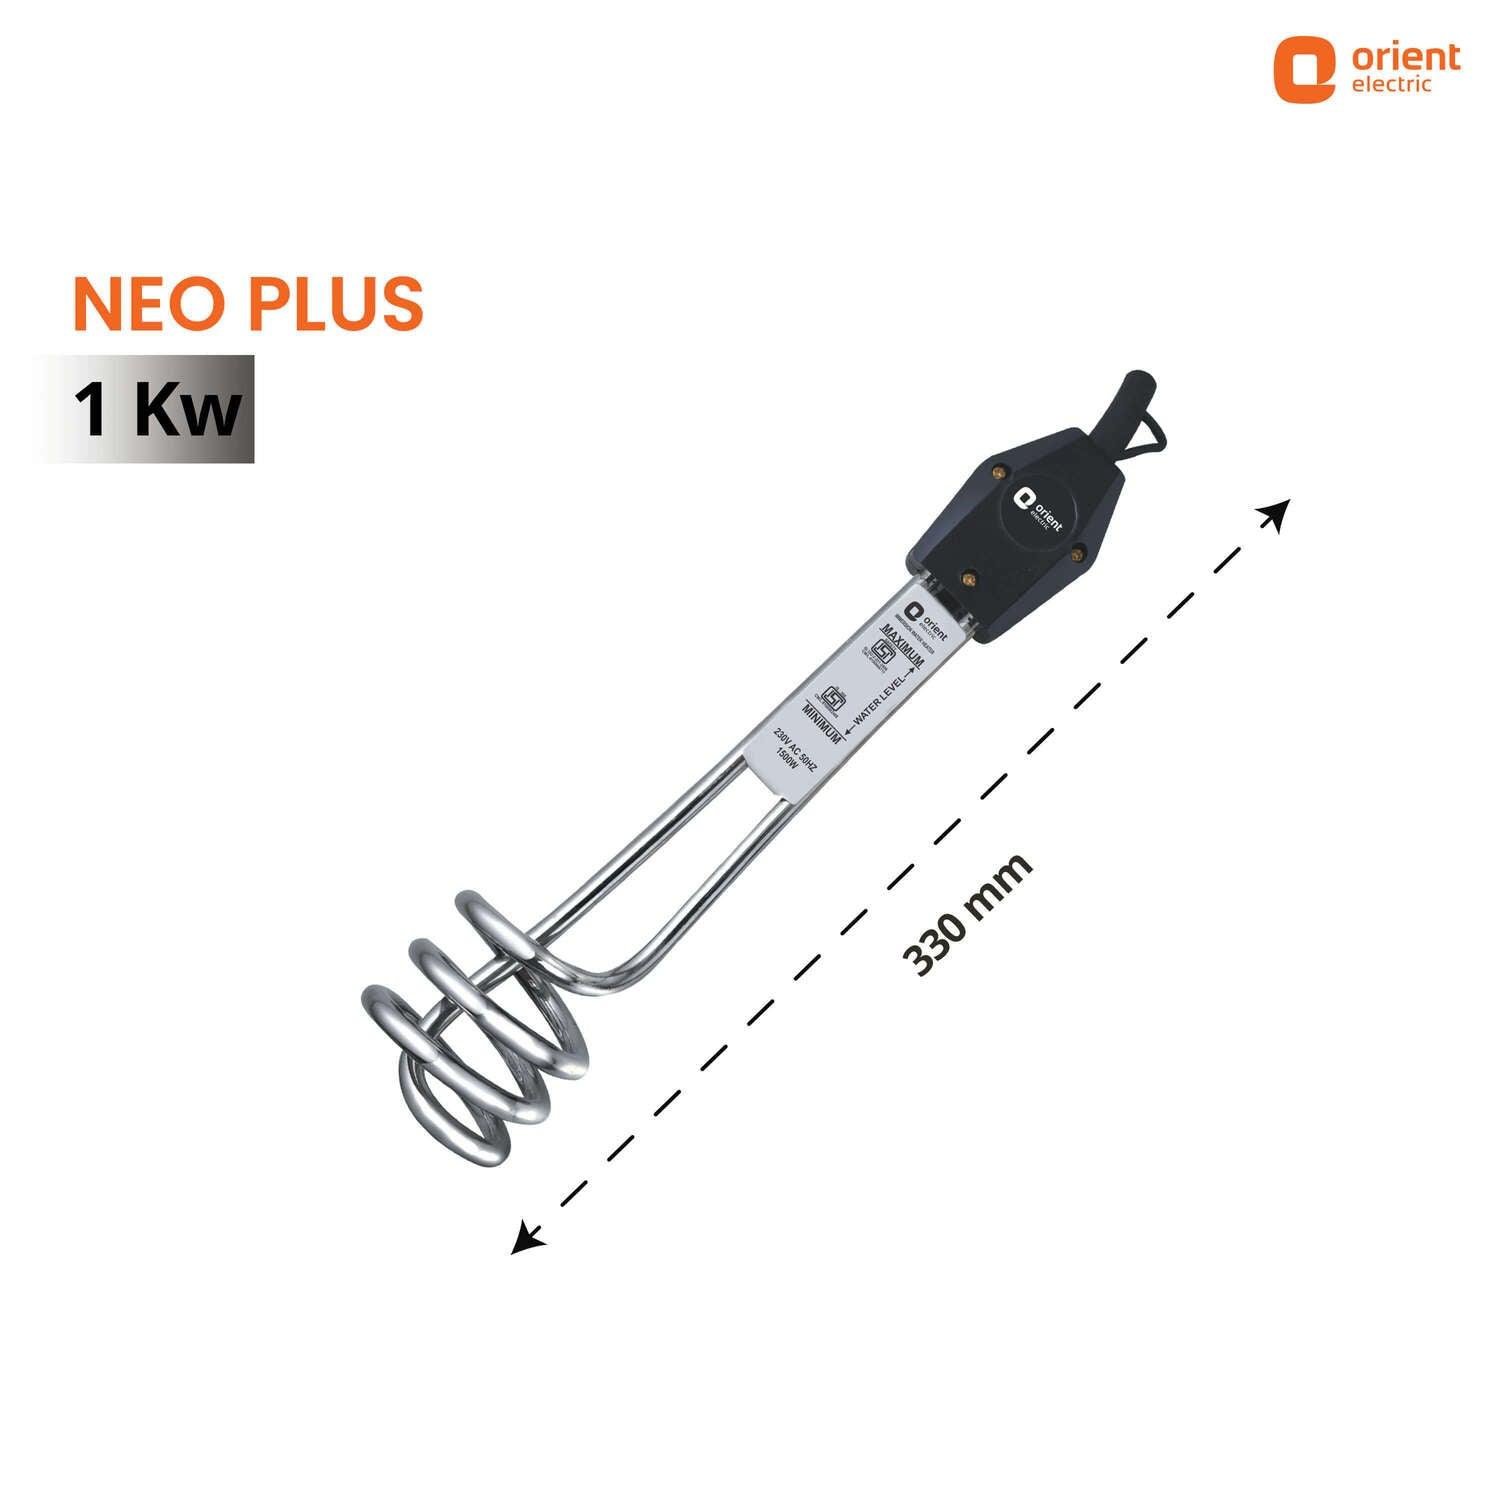 Neo Plus 1000W Immersion Rod Water Heater - Orient Electric